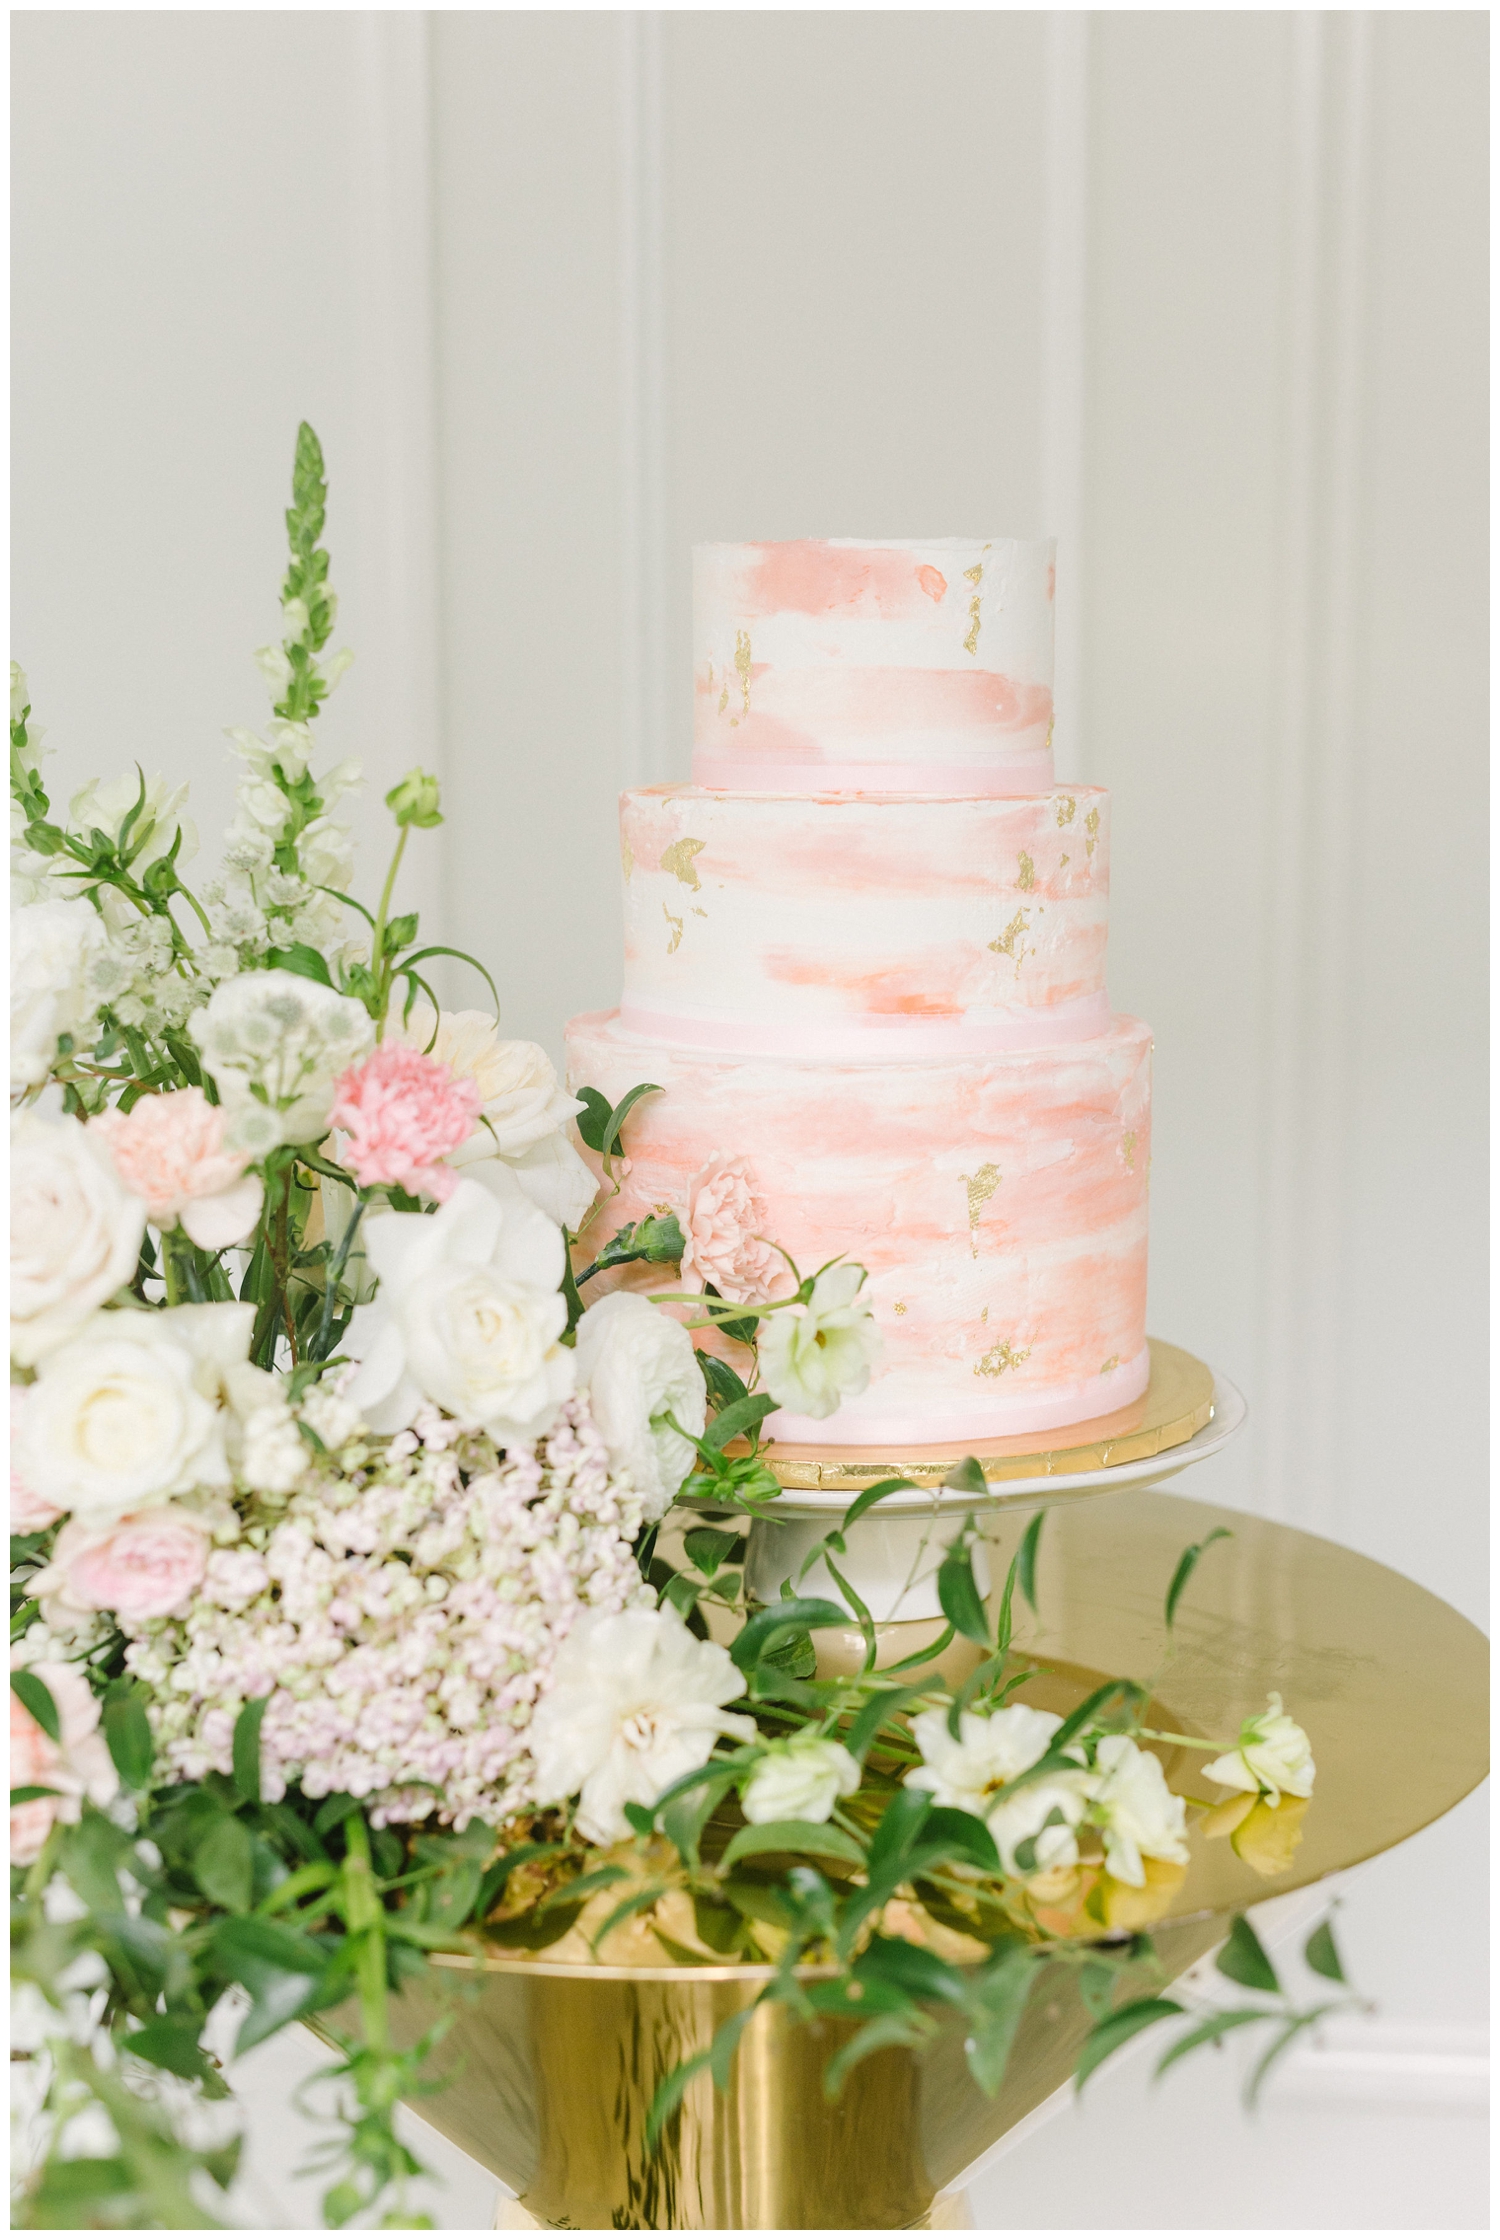 The Peach Orchard white and pink cake display